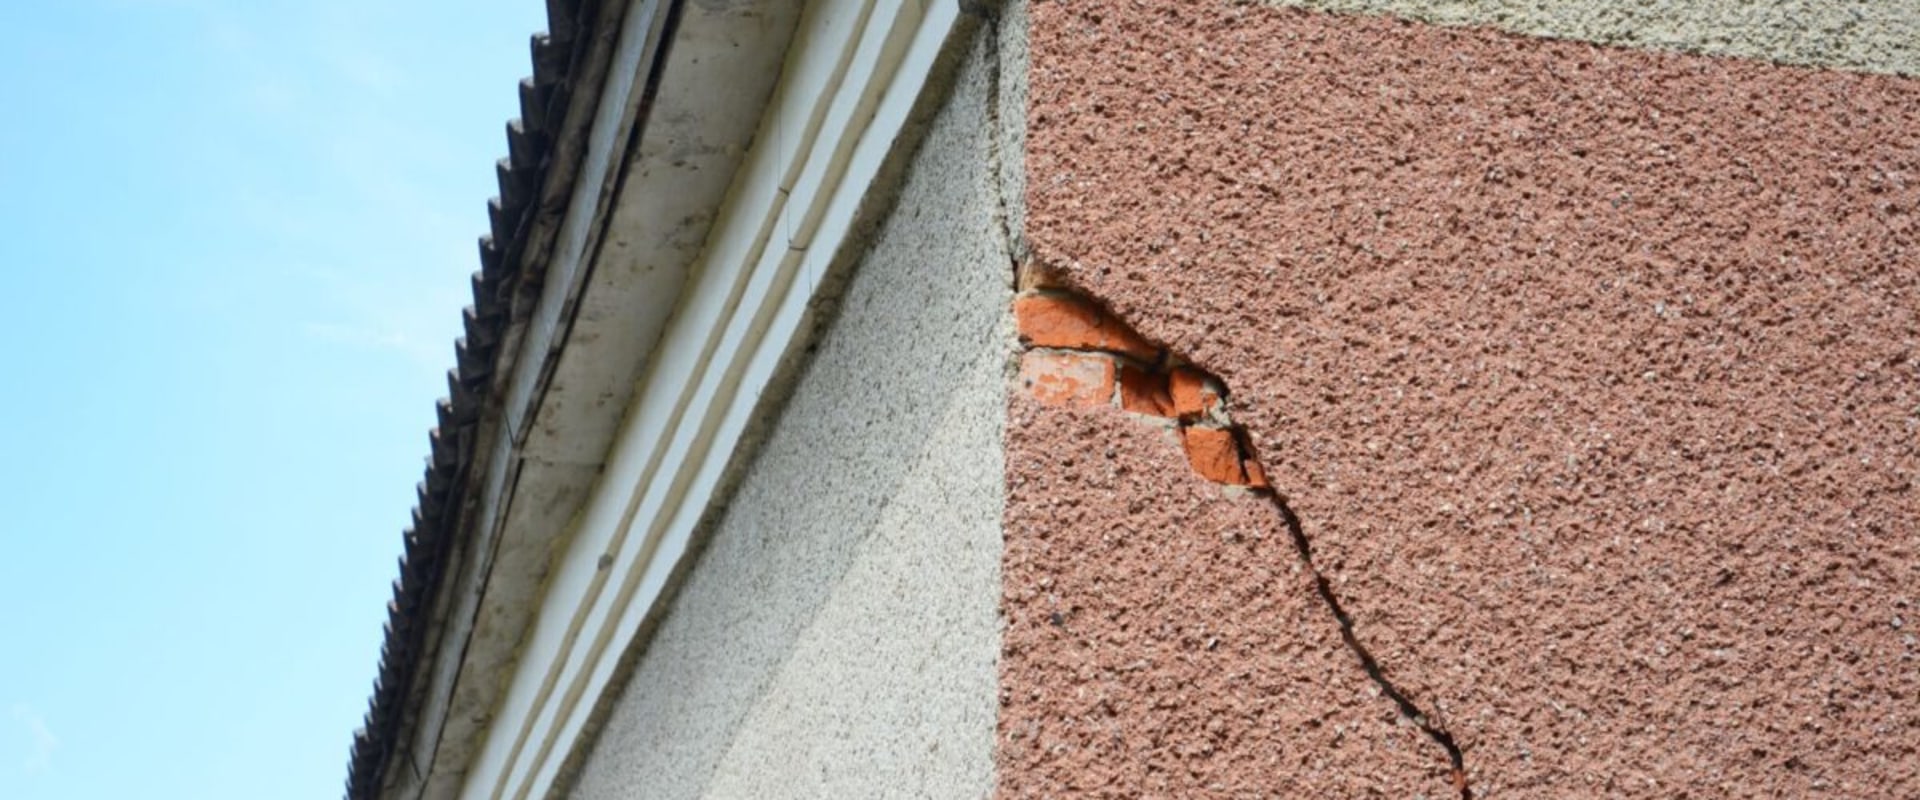 A Comprehensive Look at Structural Repairs and Cleaning